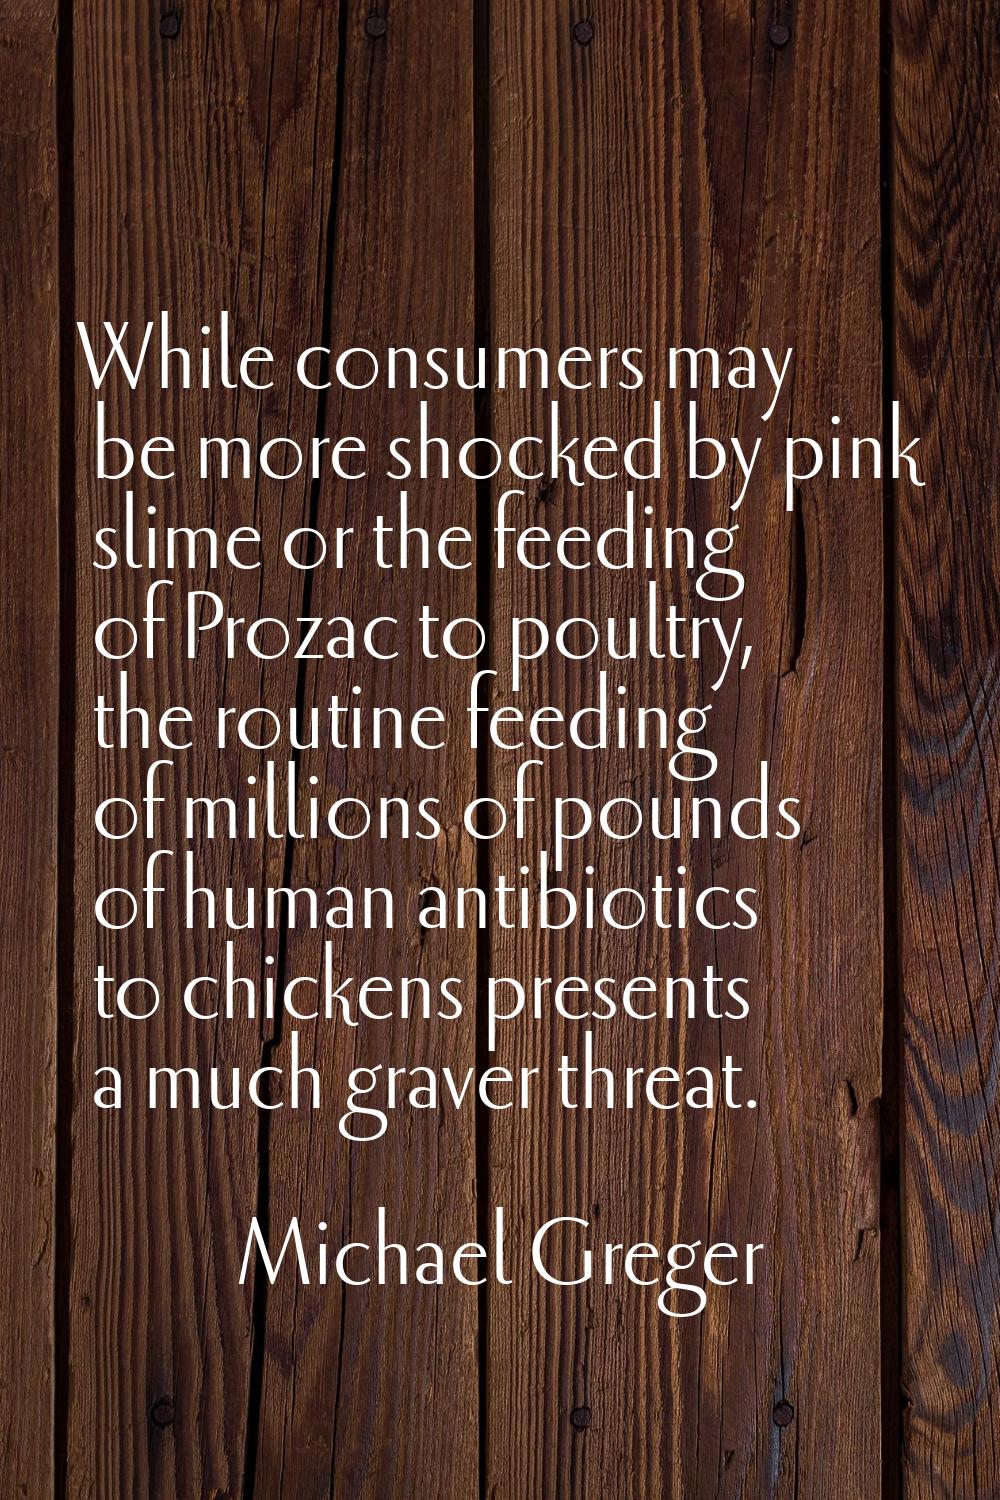 While consumers may be more shocked by pink slime or the feeding of Prozac to poultry, the routine 